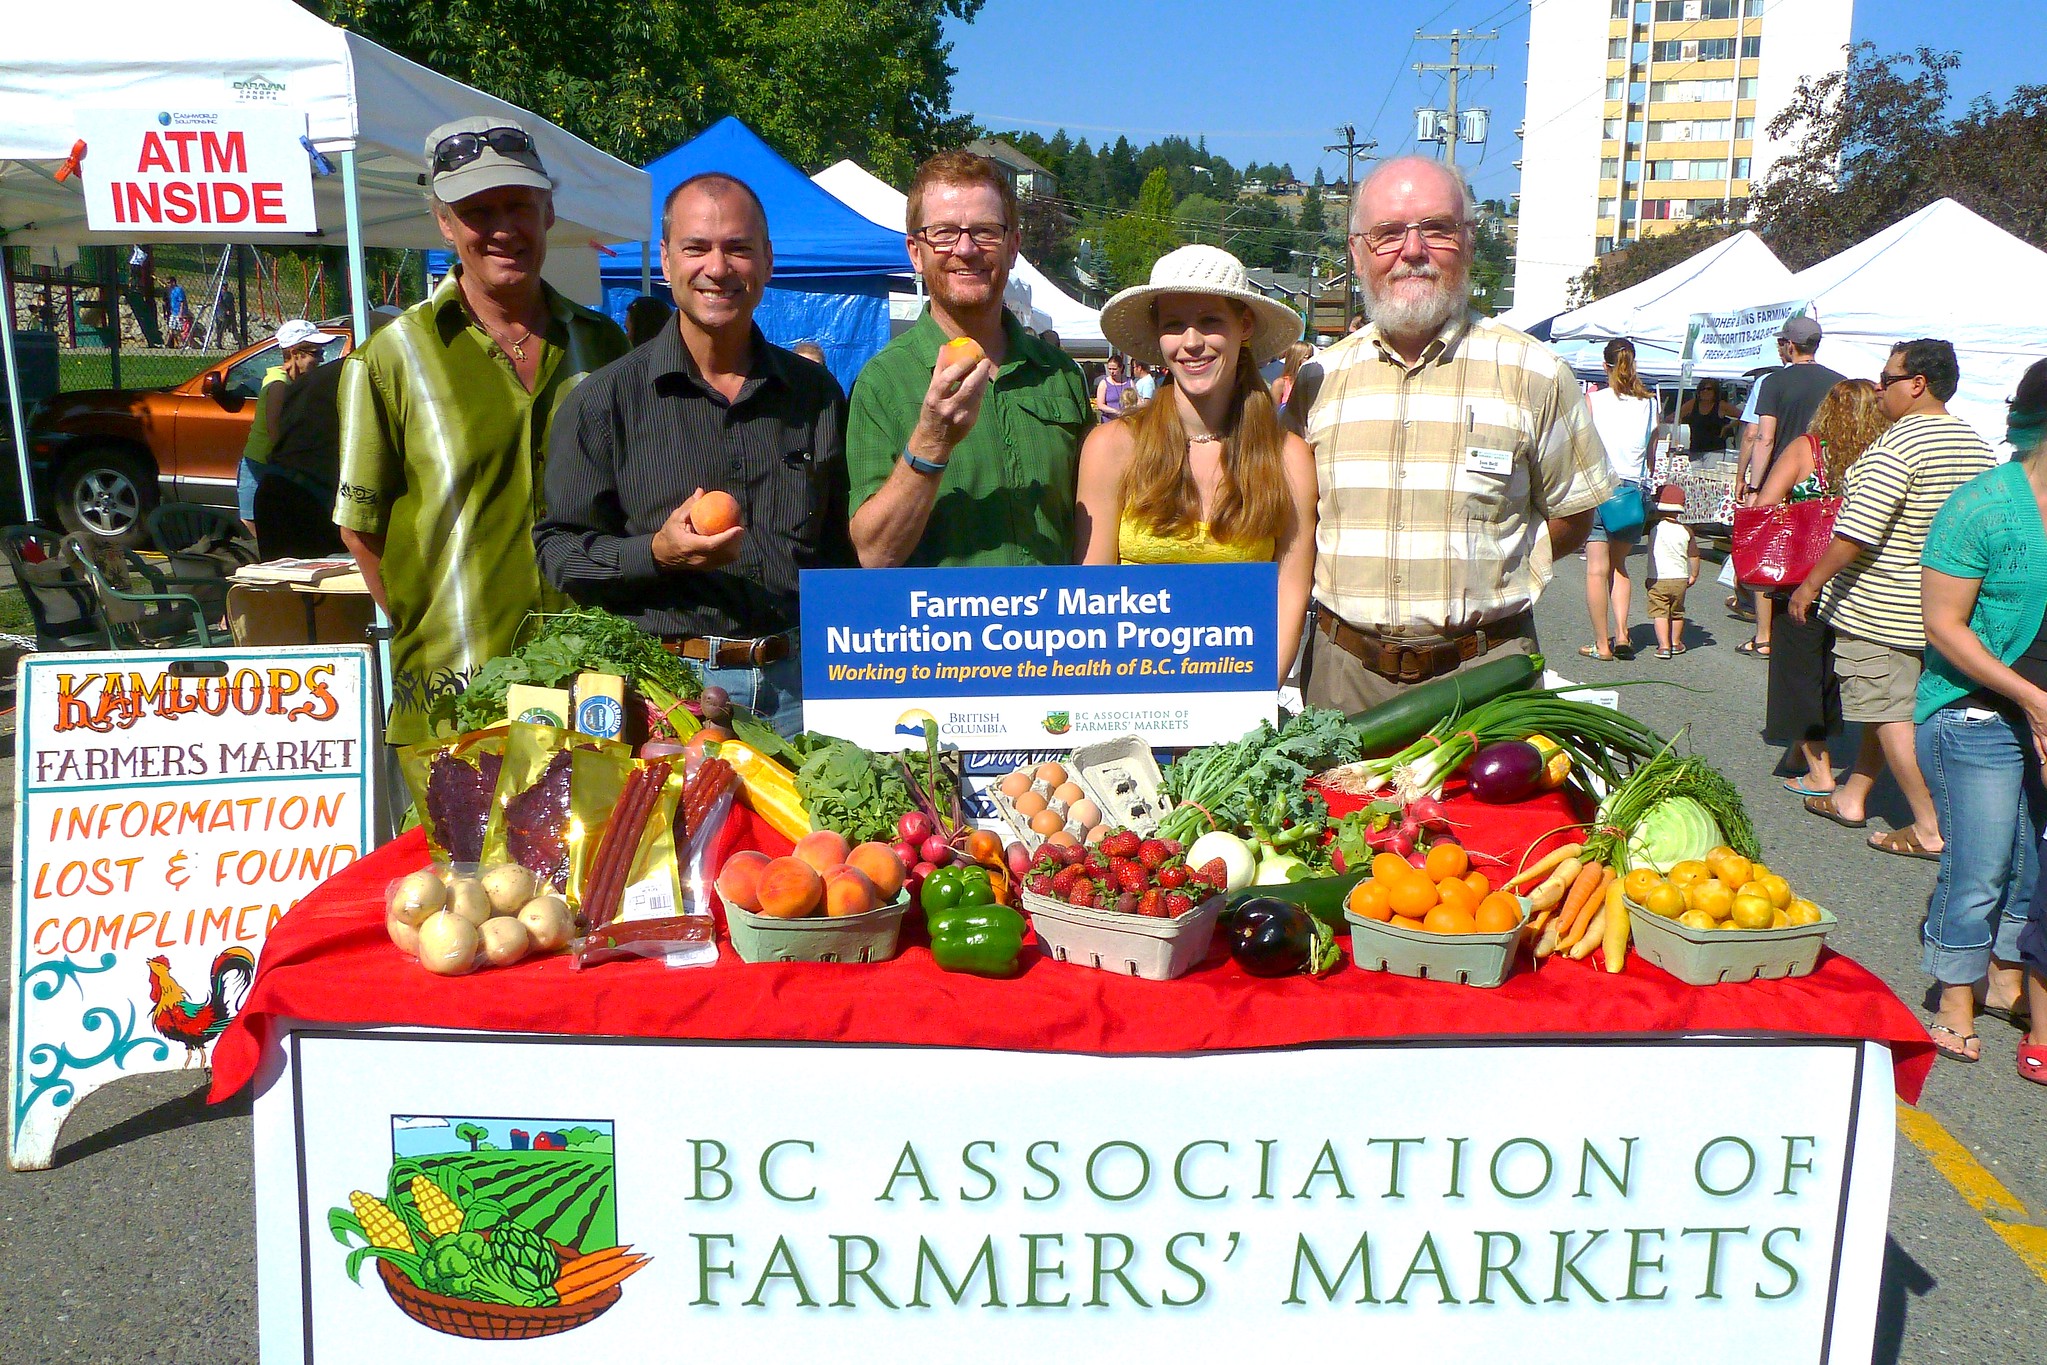 People smile around fresh produce and a sign saying "BC Association of Farmers' Markets."